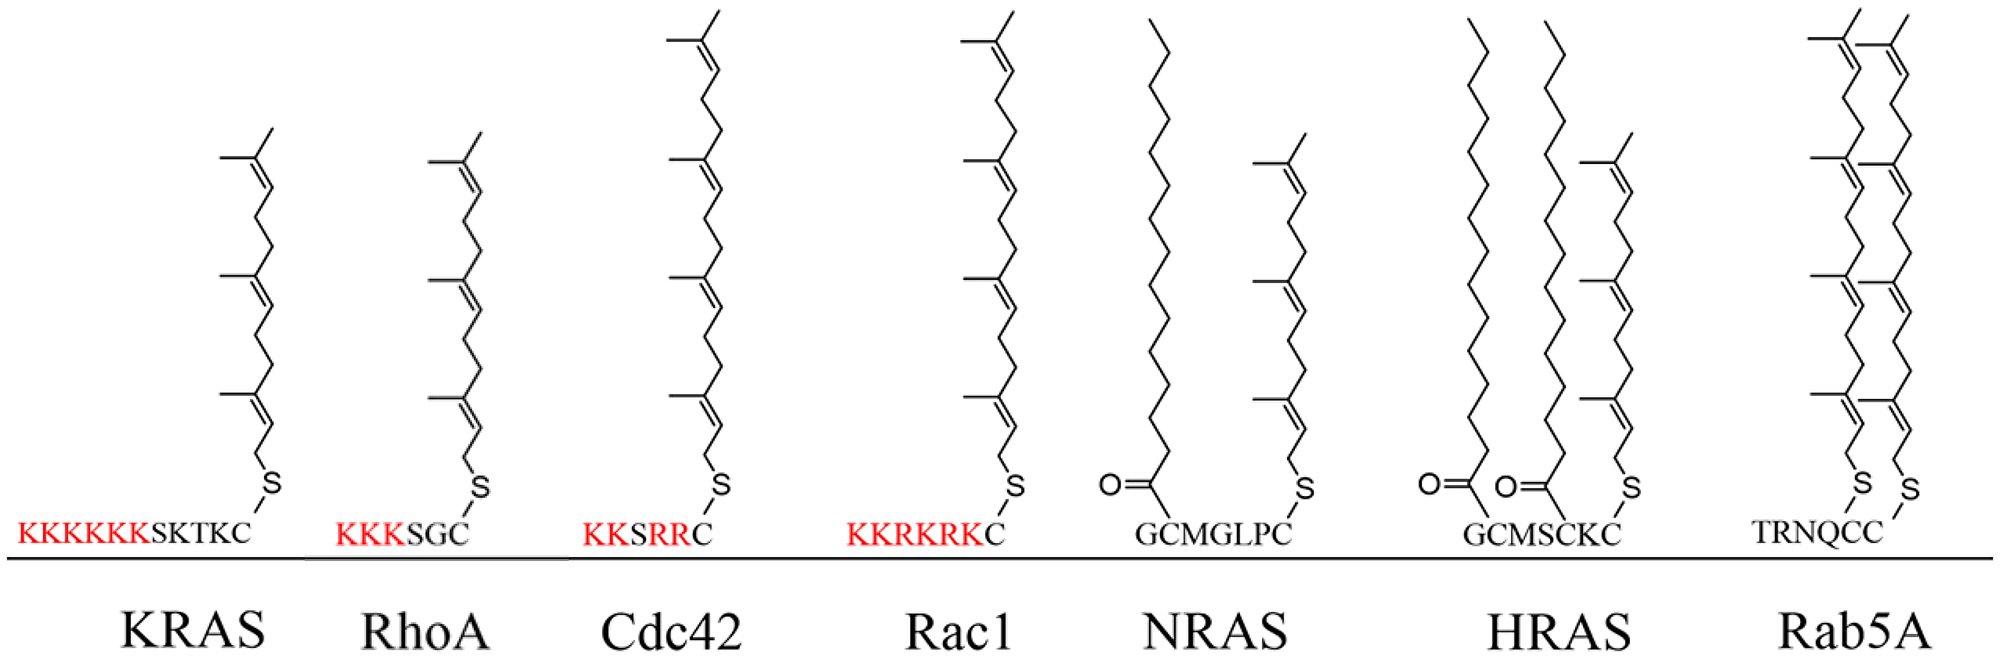 The HVR of the G-proteins and the corresponding PTMs.